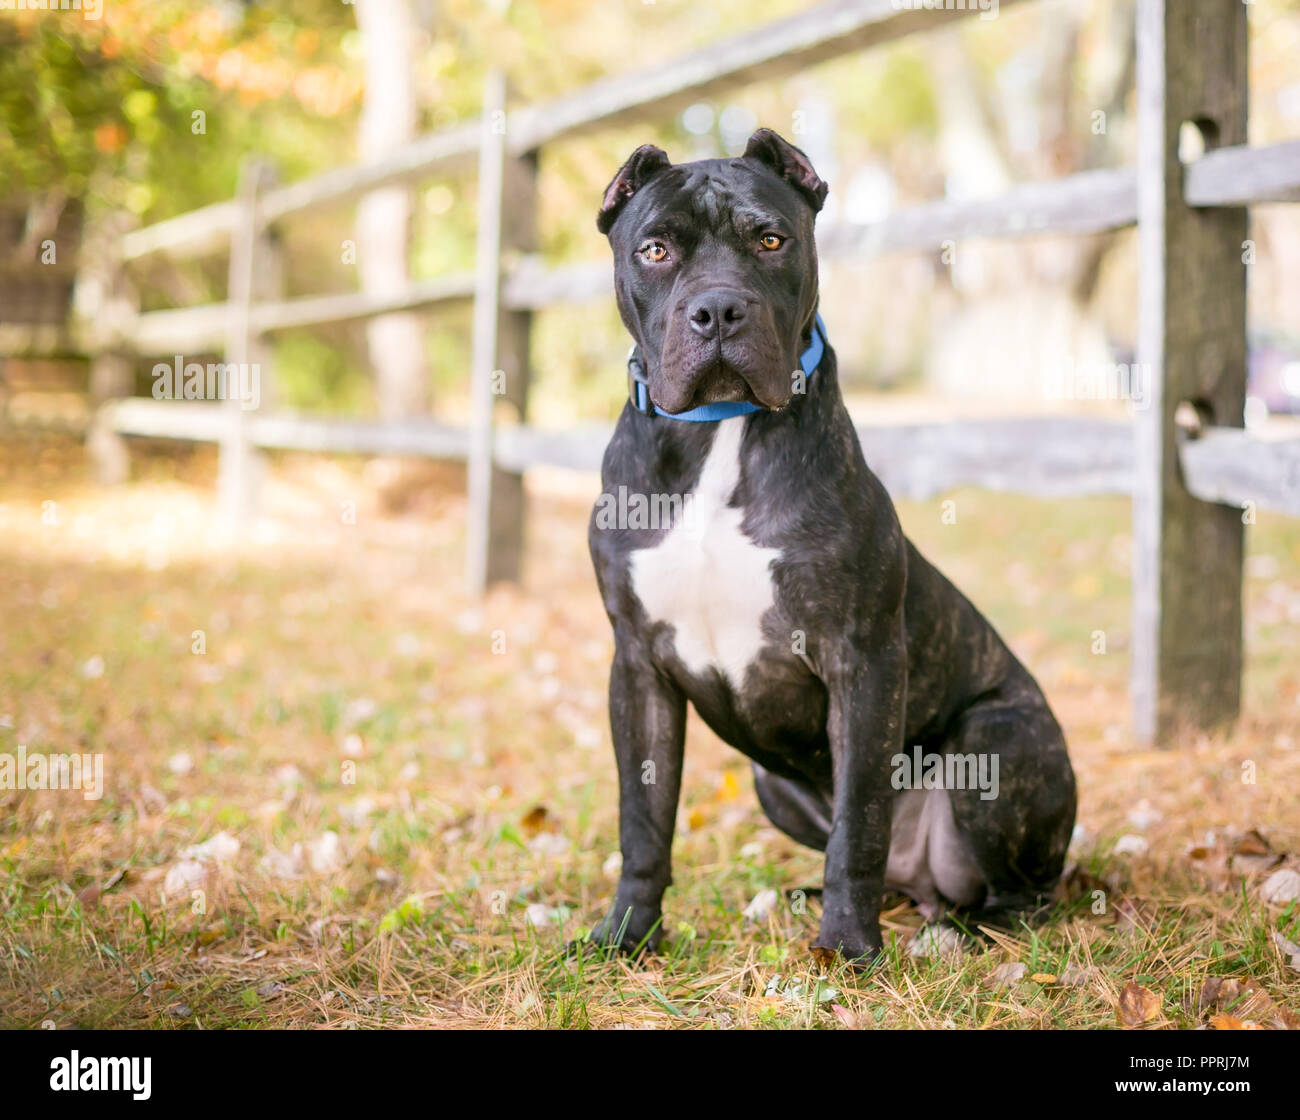 A brindle and white Presa Canario dog with cropped ears sitting outdoors by a rustic wooden fence Stock Photo